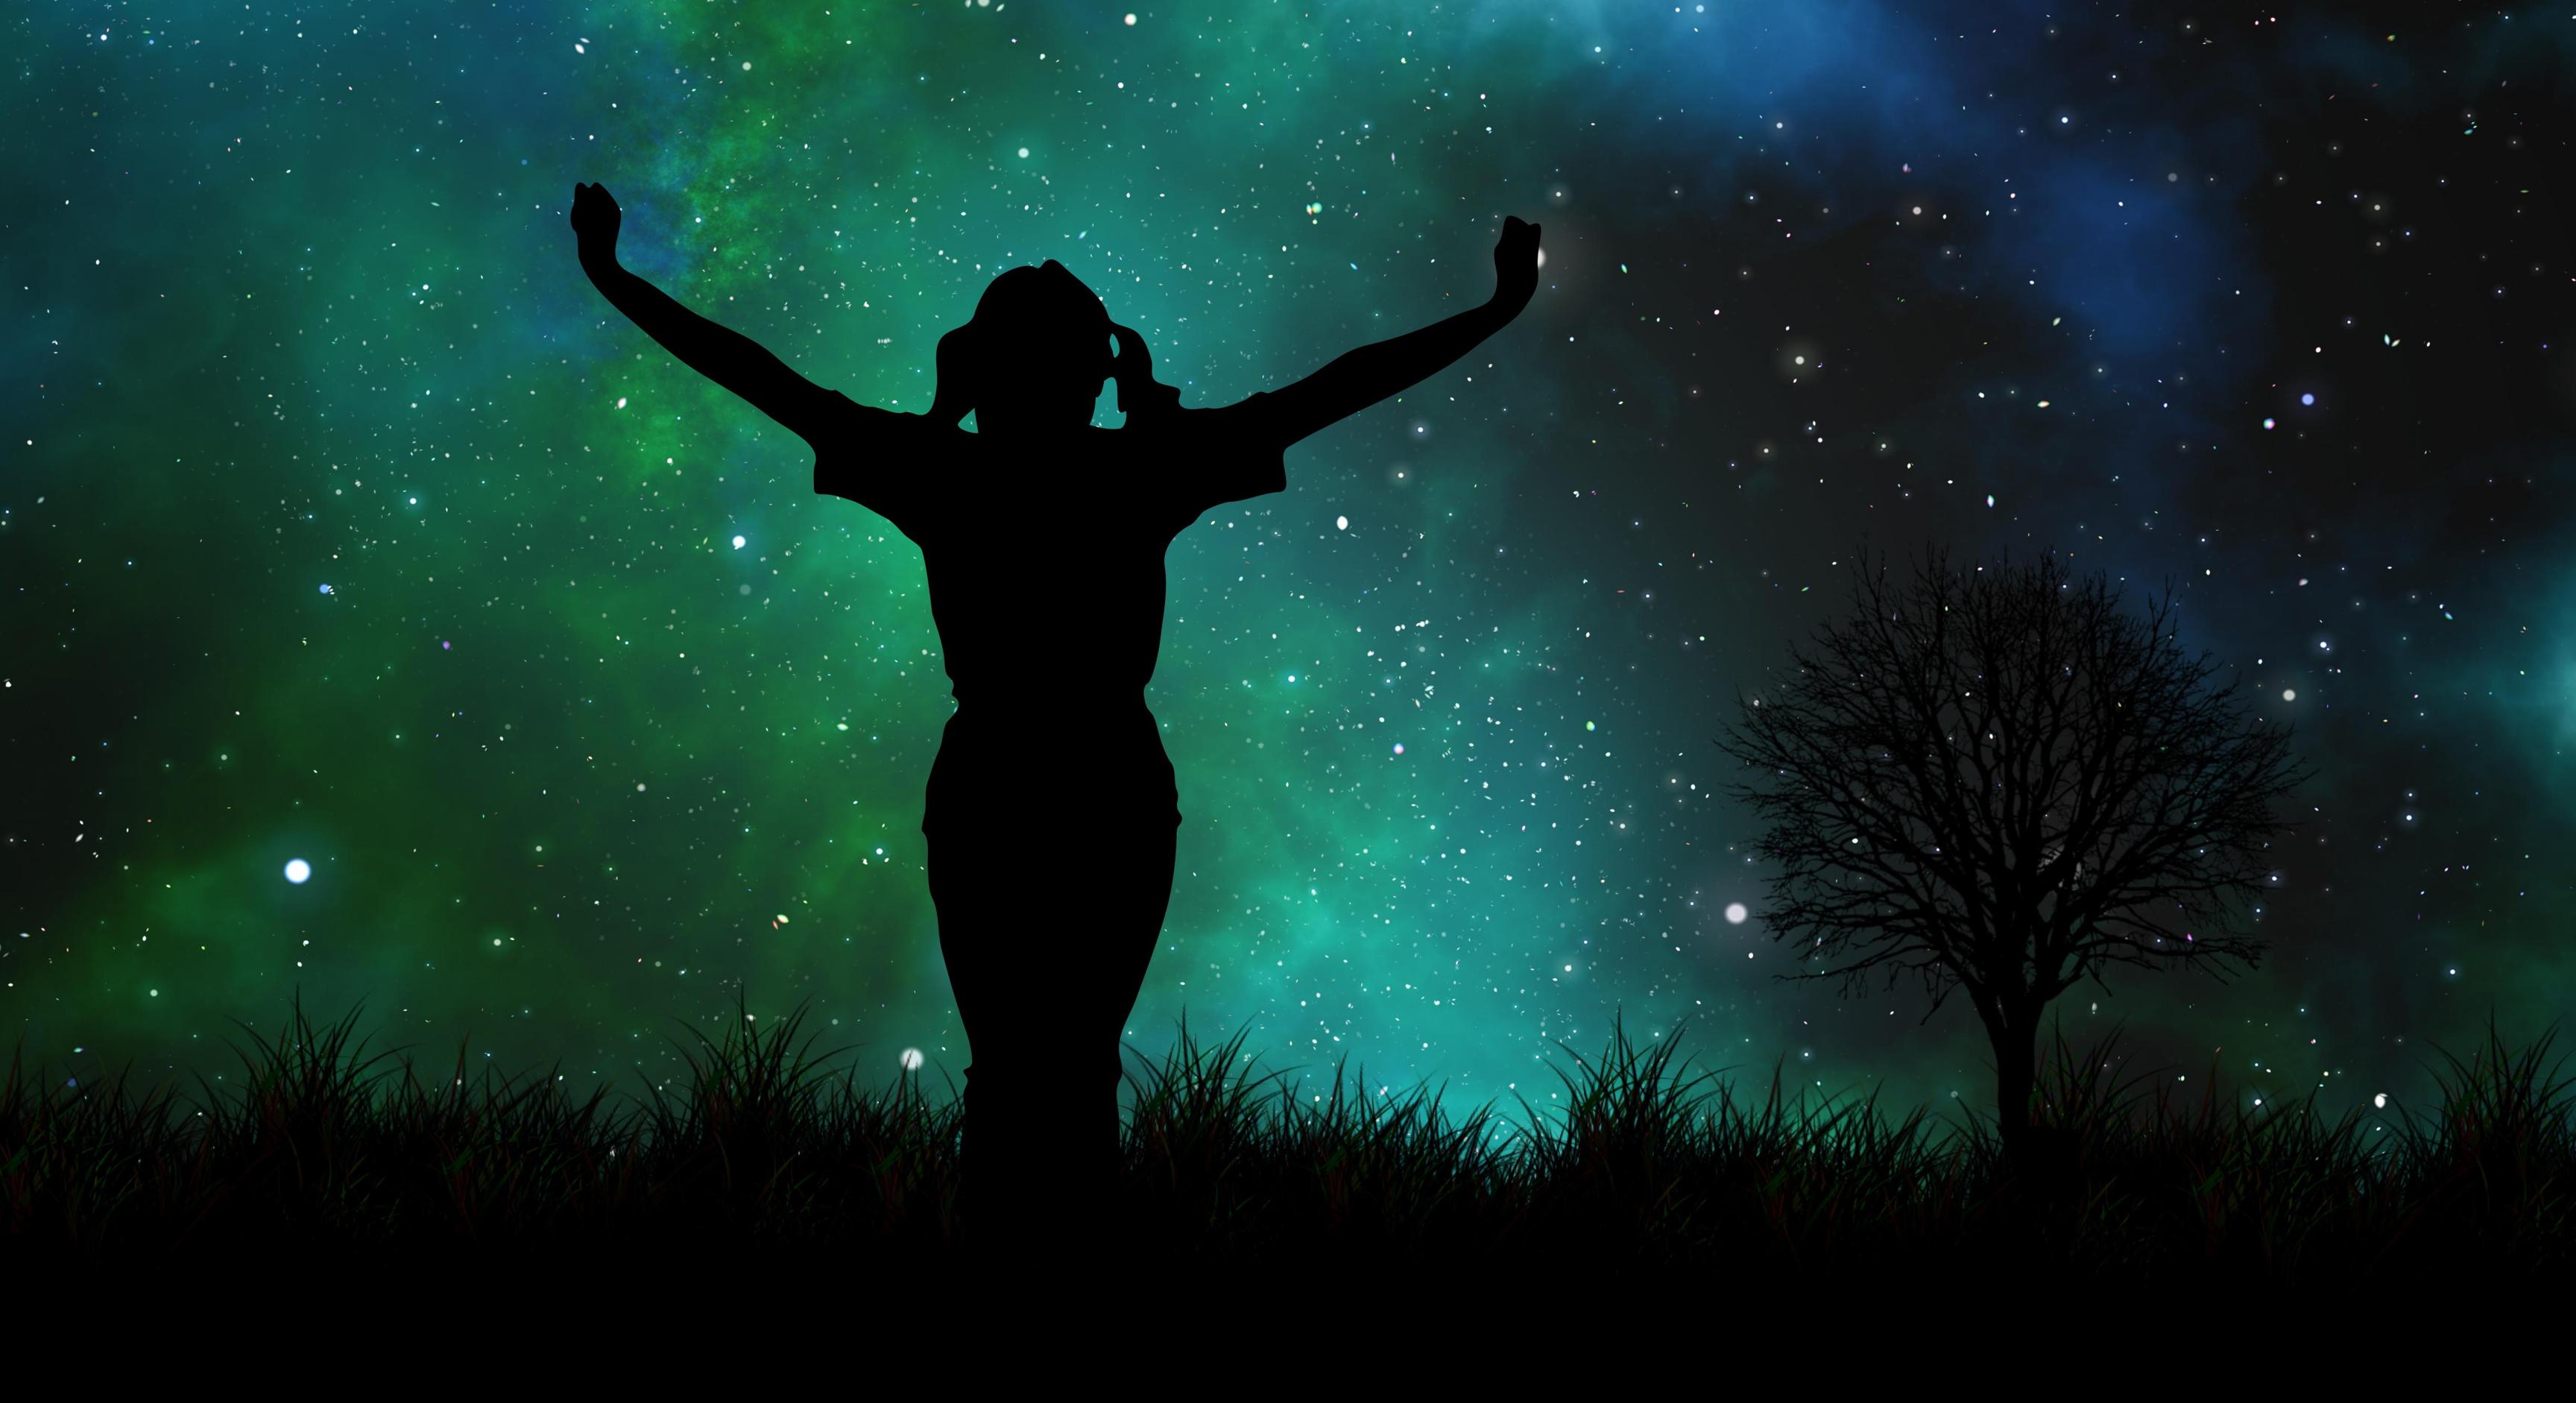 Silhouette of woman standing on hill in front of galaxy backdrop